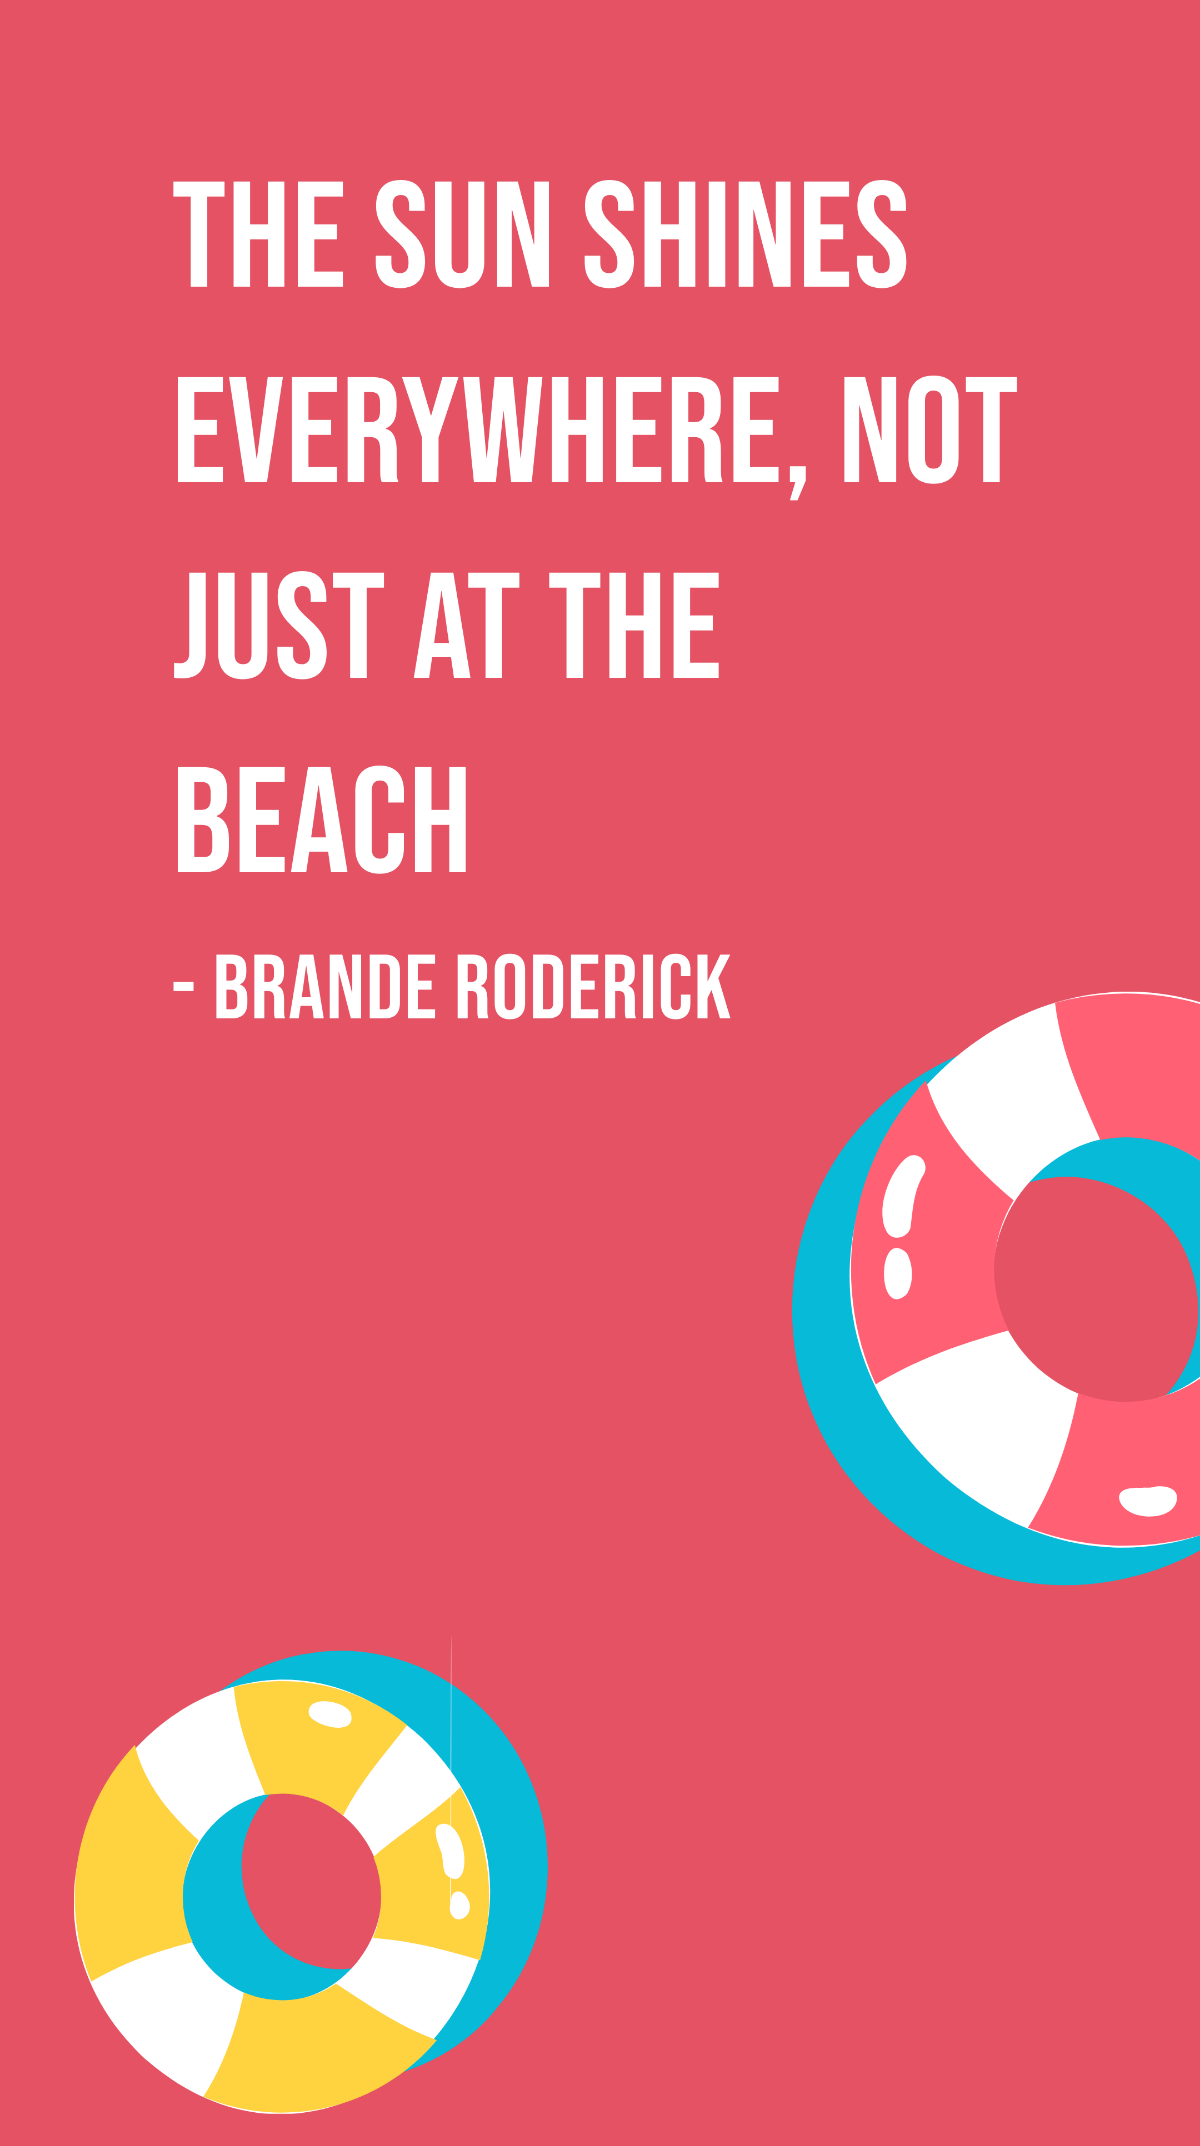 Free Brande Roderick - The sun shines everywhere, not just at the beach Template